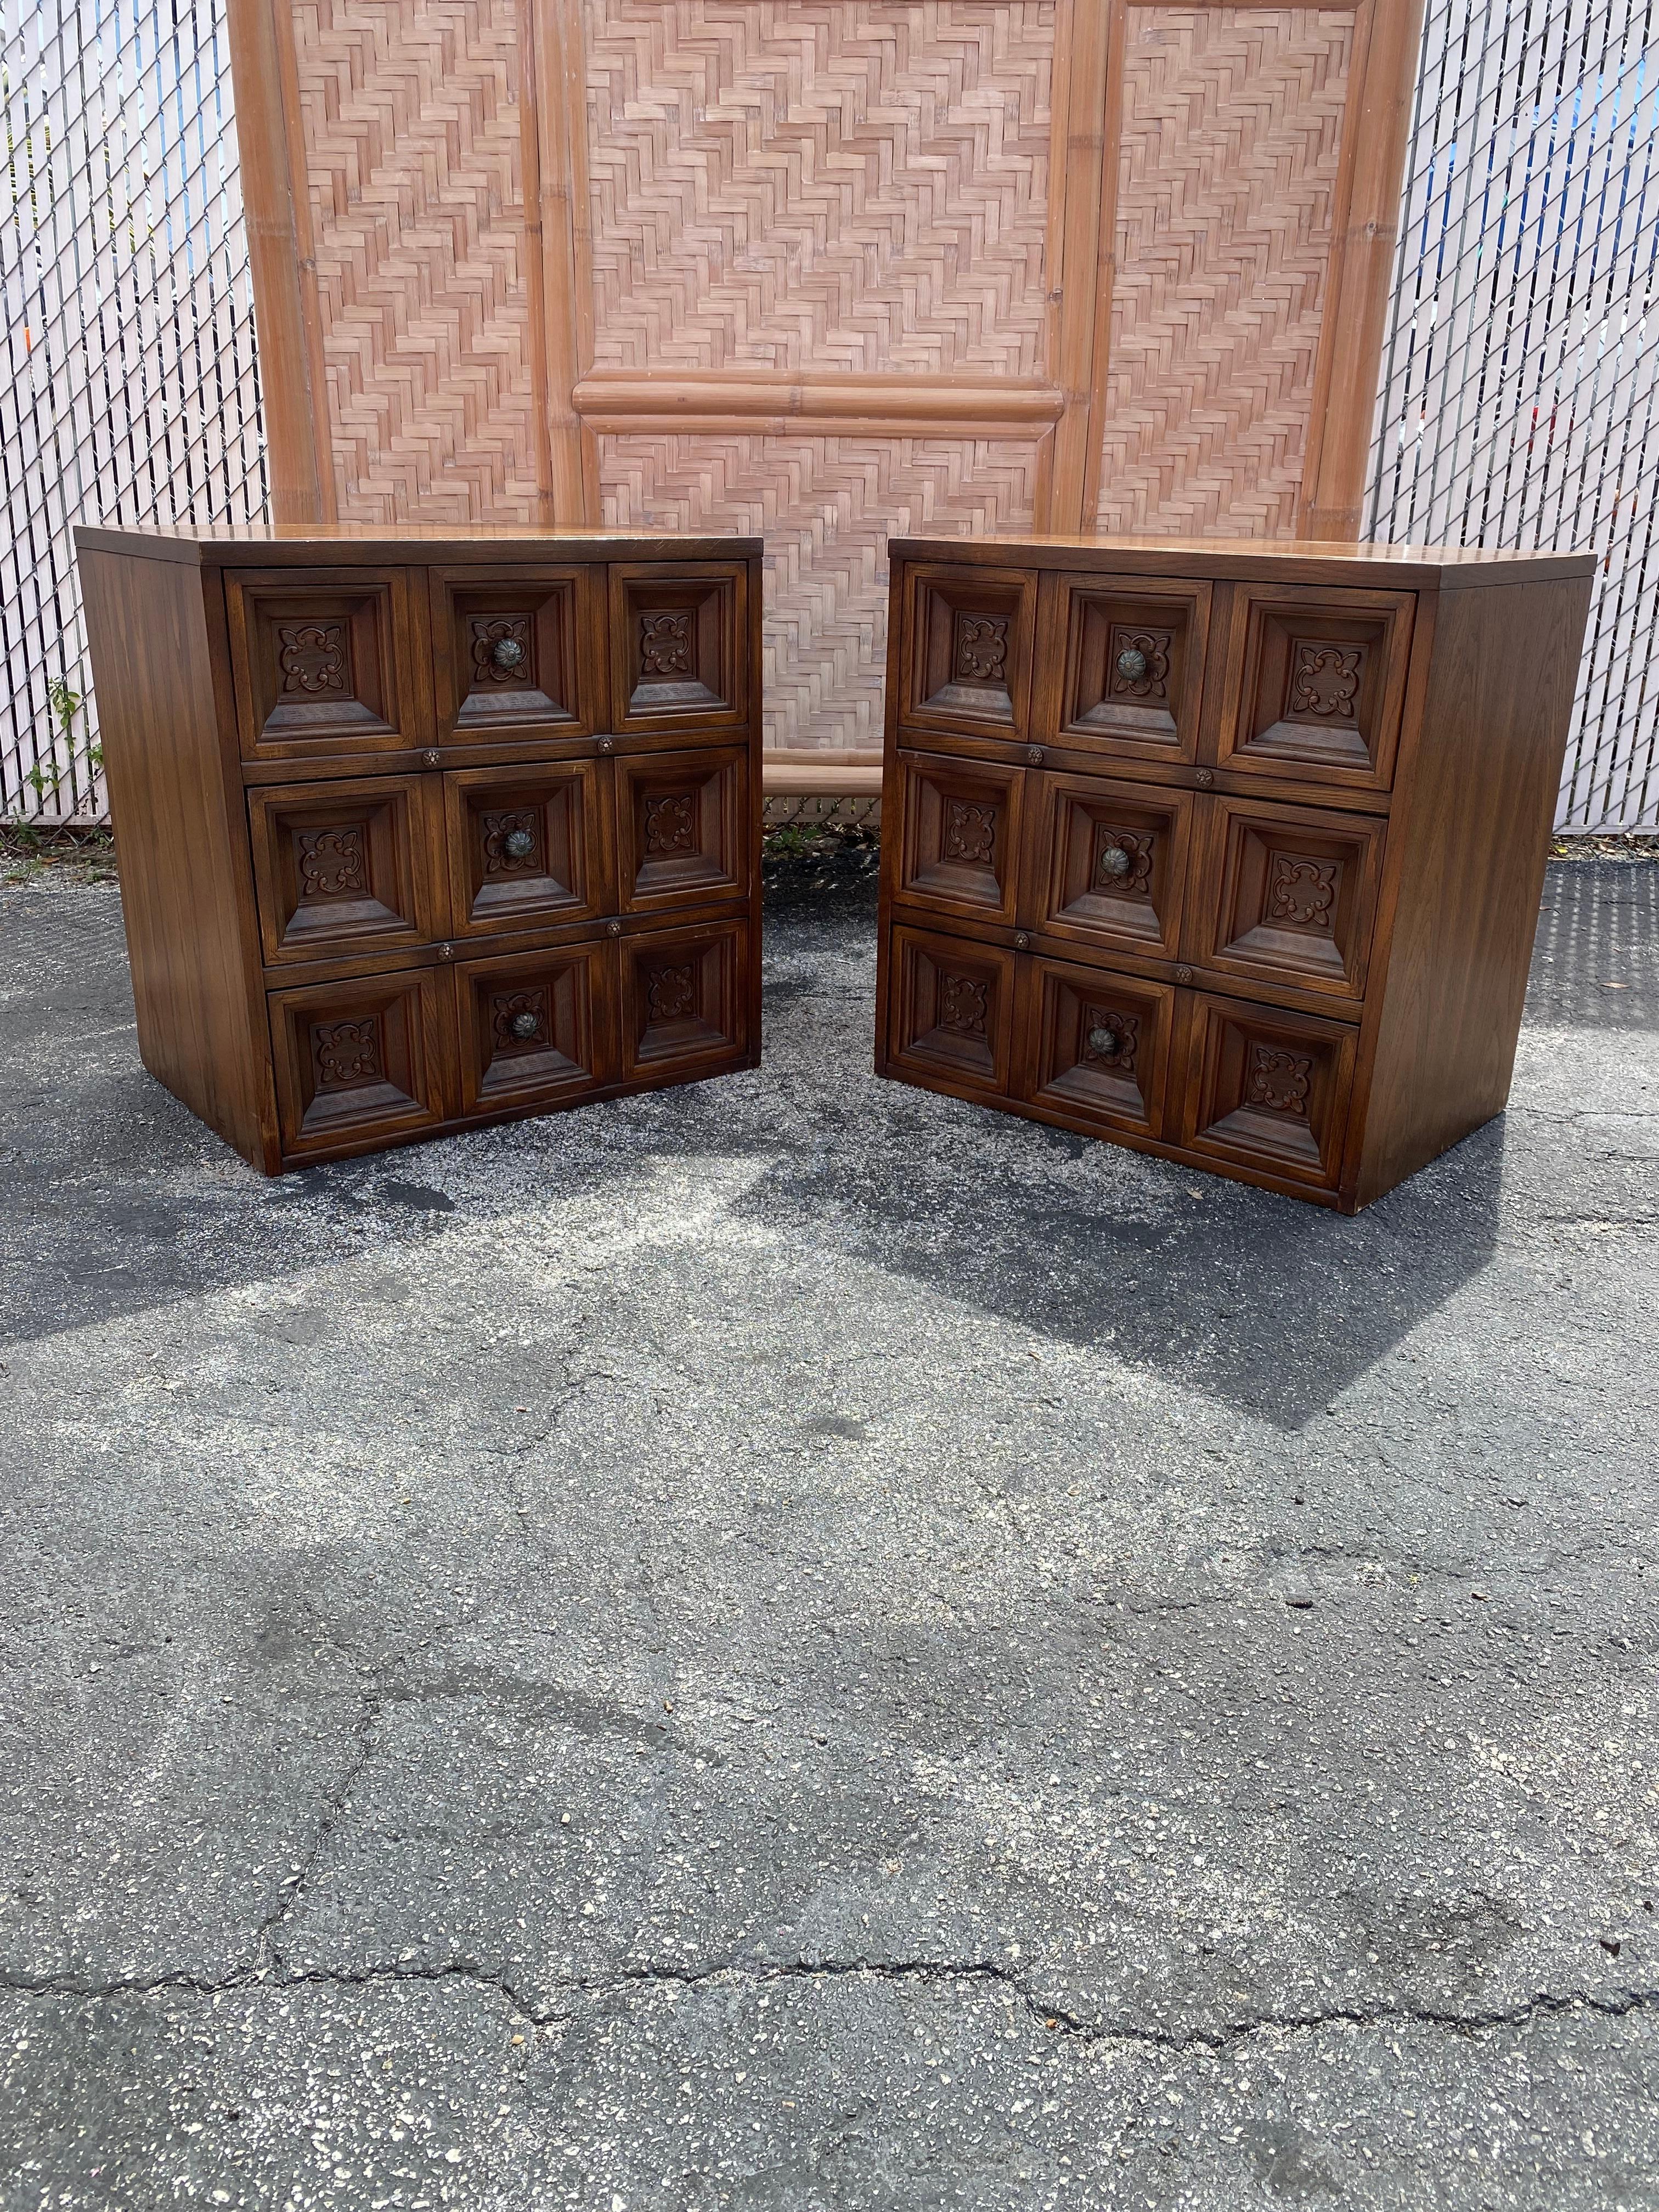 On offer on this occasion is one of the most stunning,  nightstands or end tables you could hope to find. Outstanding design is exhibited throughout. The beautiful set is statement piece and packed with personality!  Just look at the gorgeous